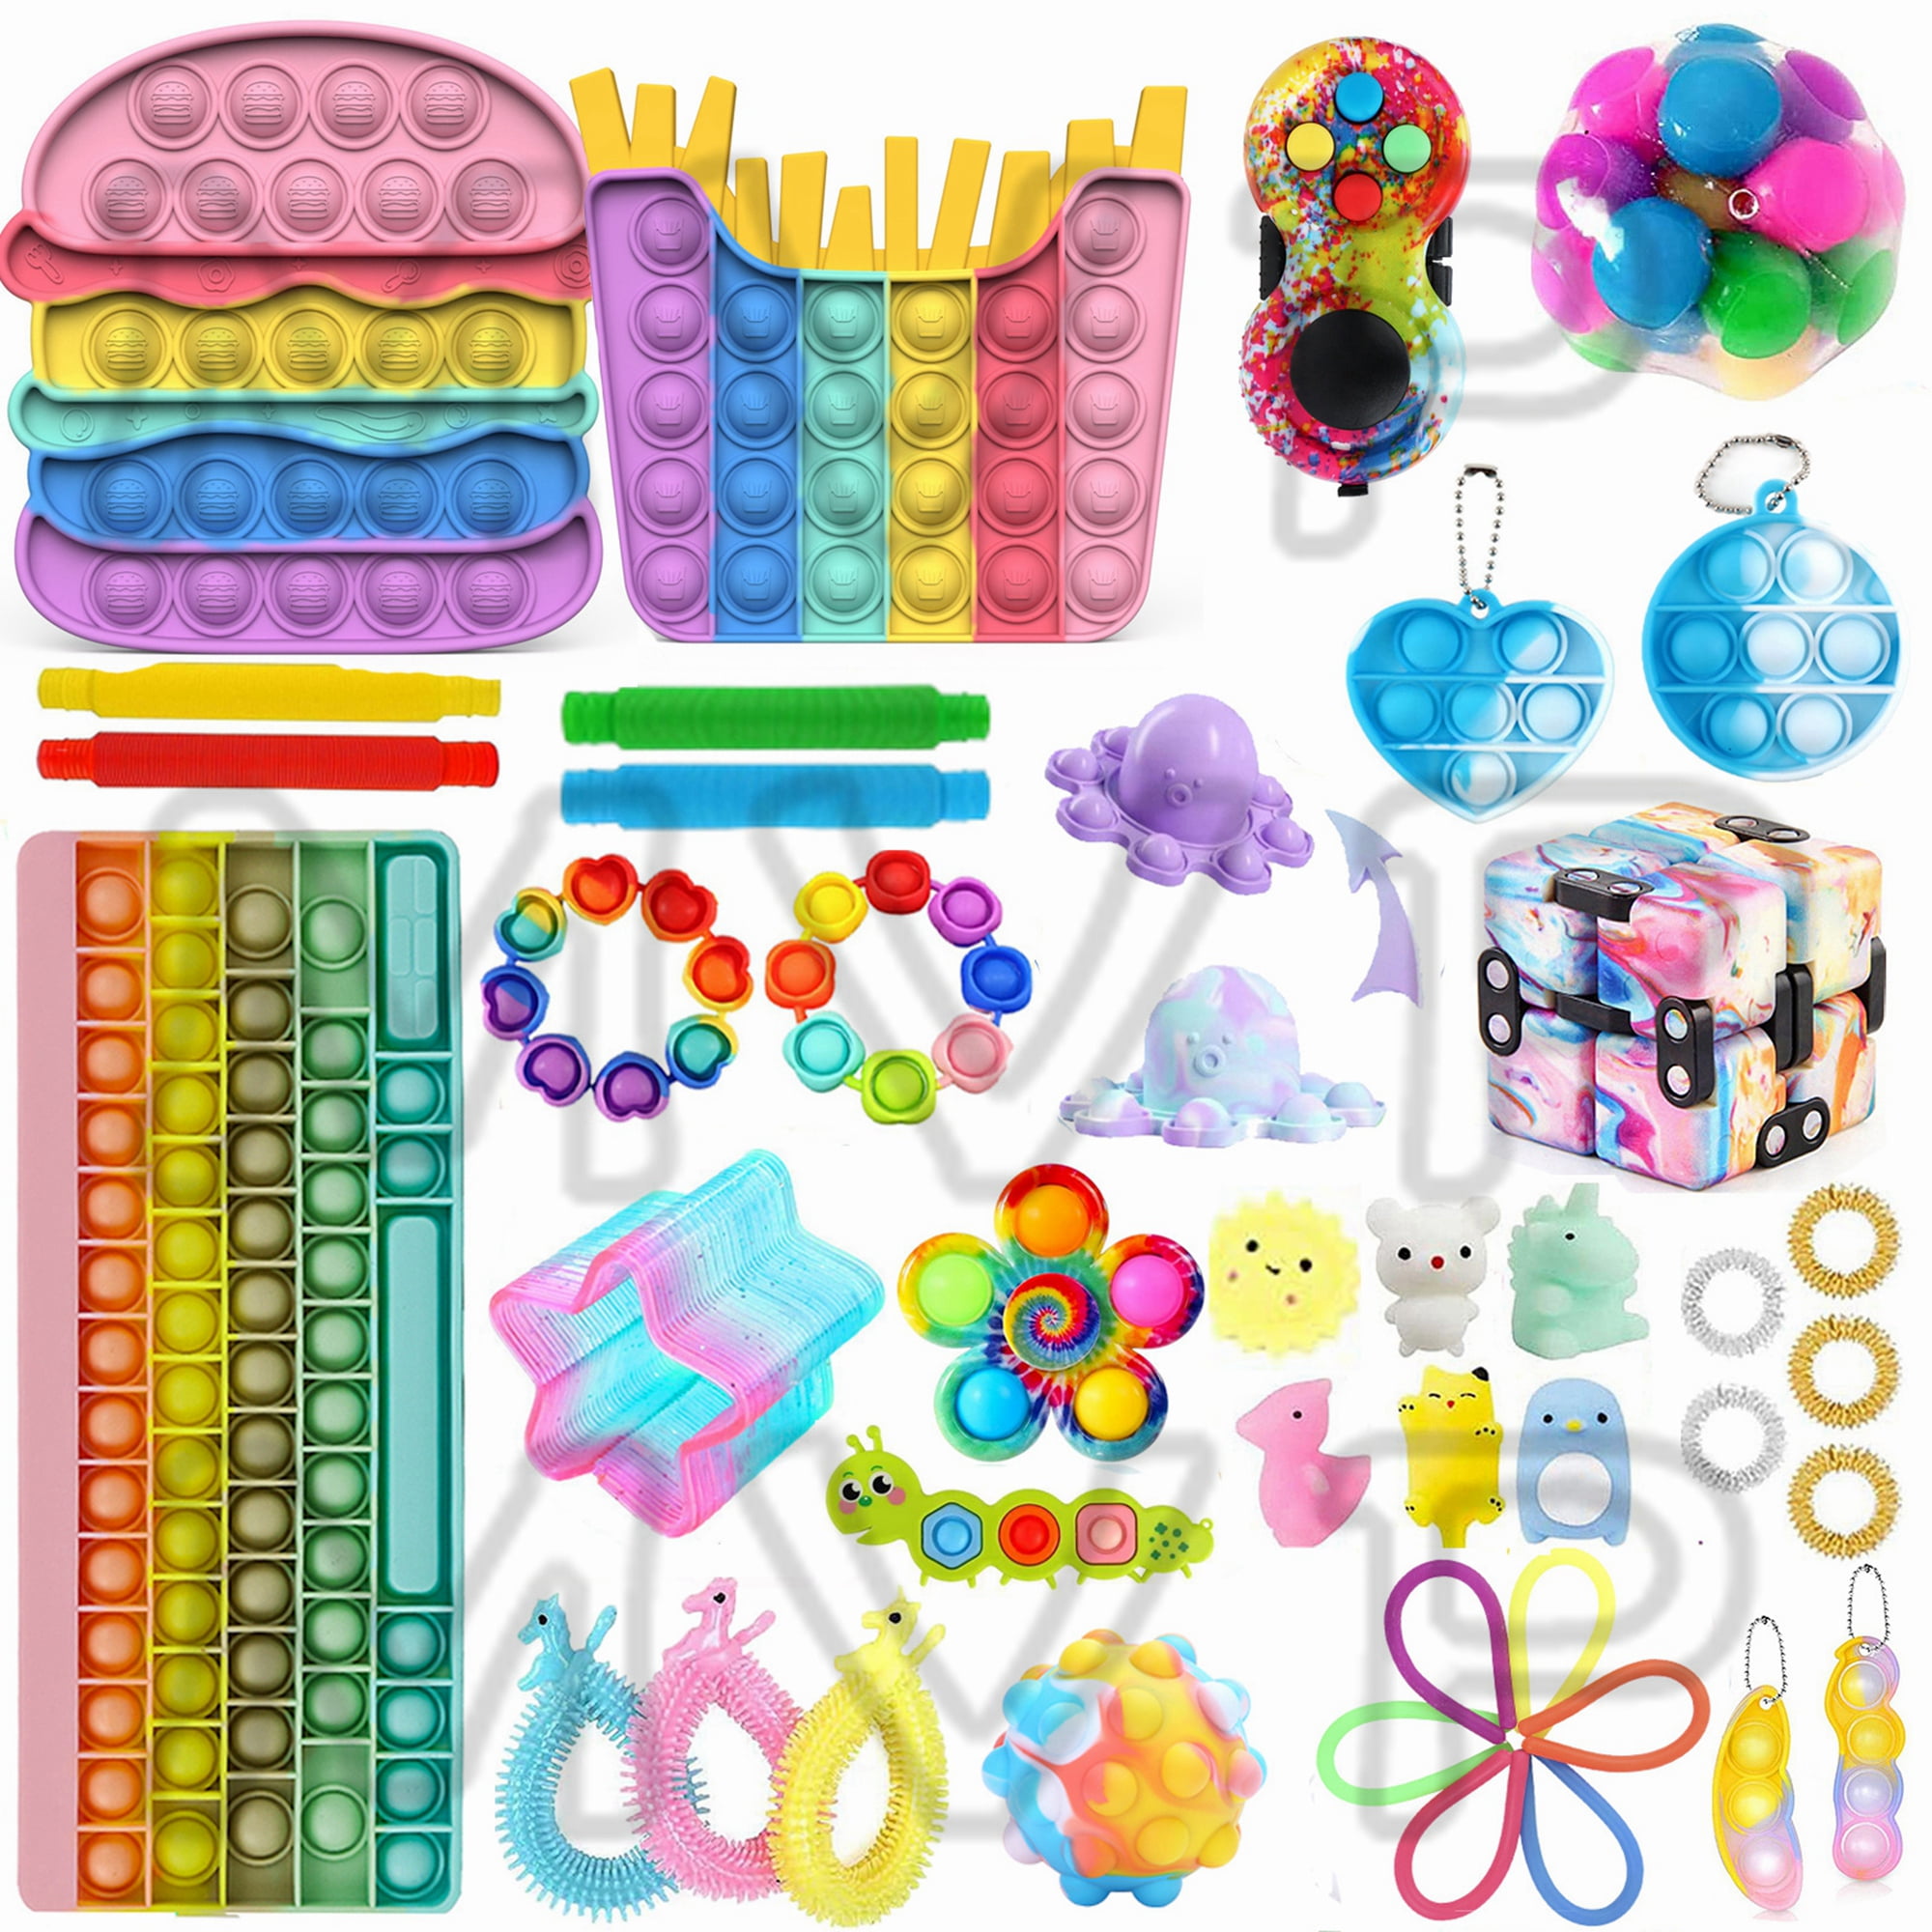 William Sturdy & Colorful Sensory Fidget Toys for Kids - 60pcs Fidgets Toys  Kit For Children, Girls and Boys for Focus, Concentration & Classroom